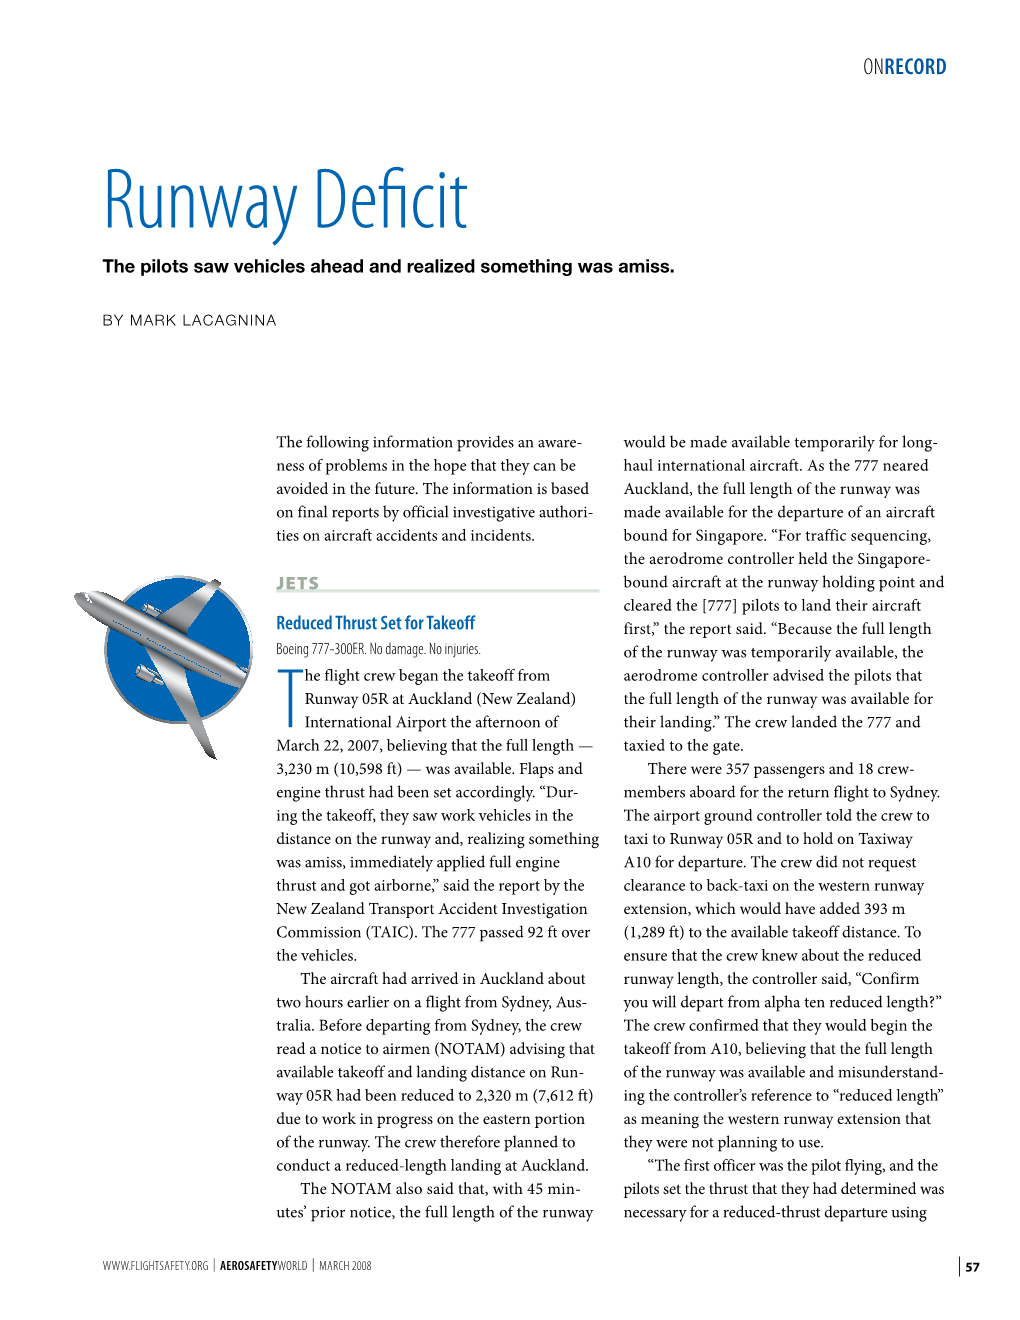 Runway Deficit the Pilots Saw Vehicles Ahead and Realized Something Was Amiss